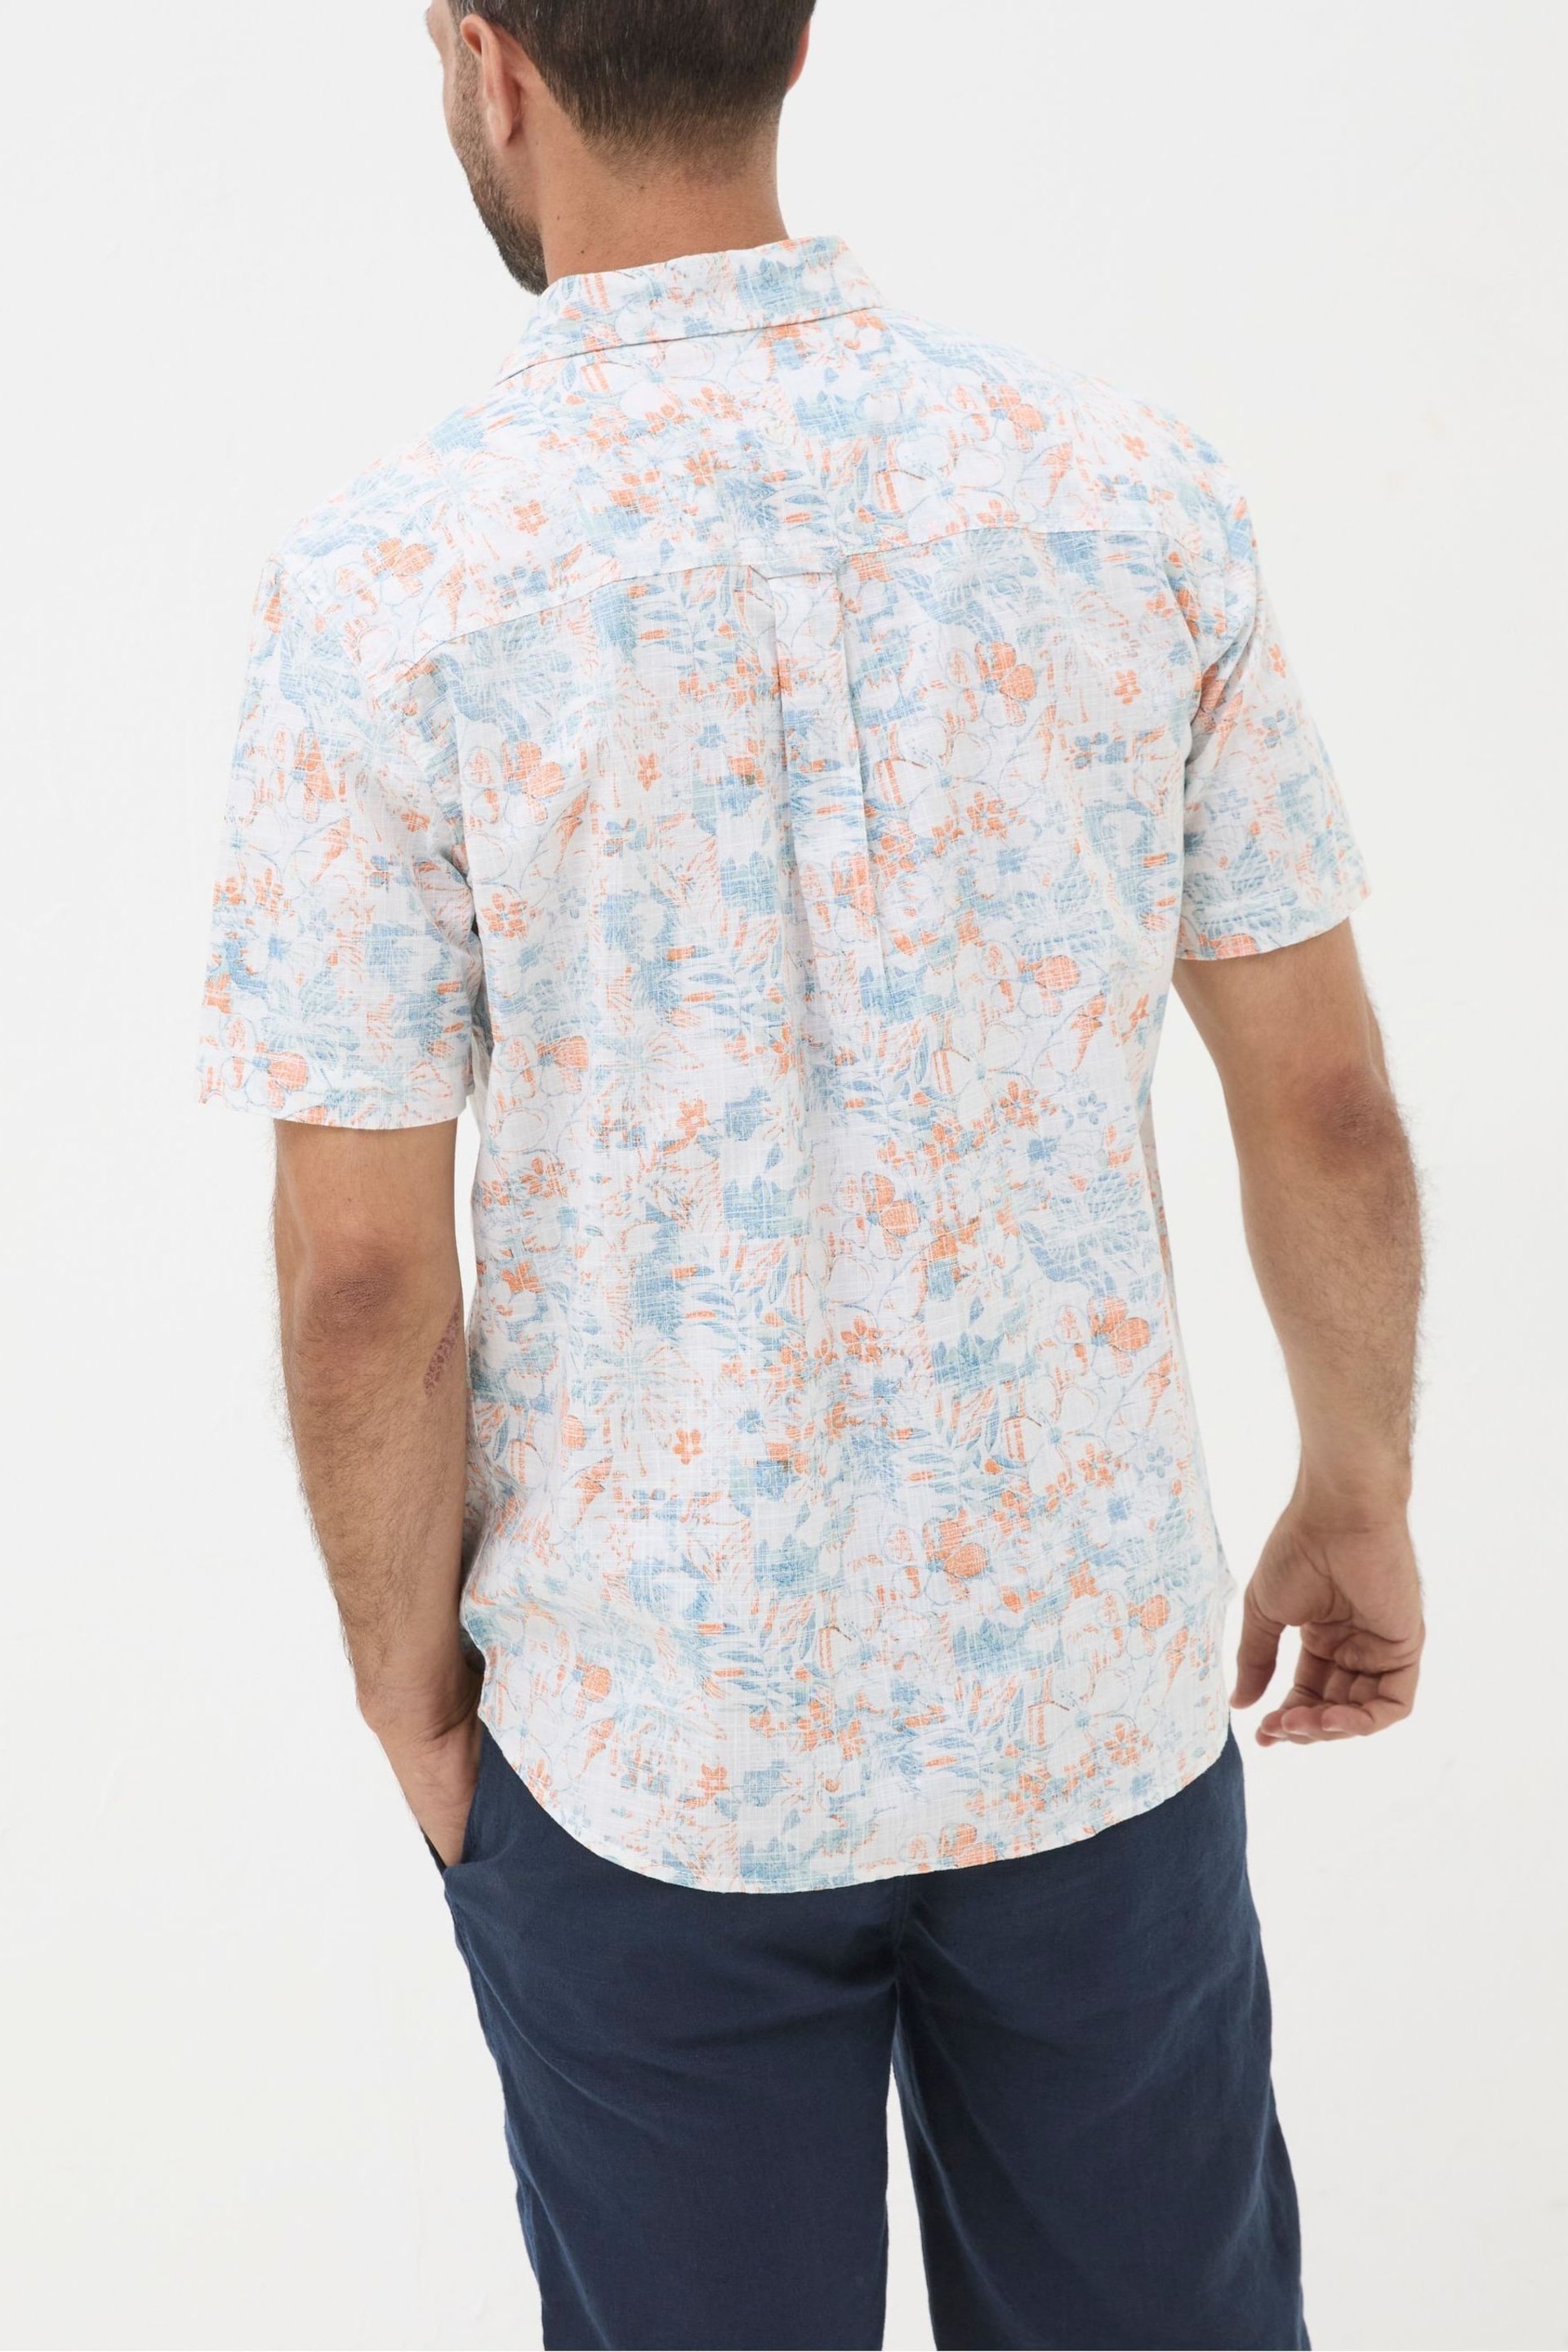 FatFace White Sketchy Hibiscus Print Shirt - Image 2 of 4